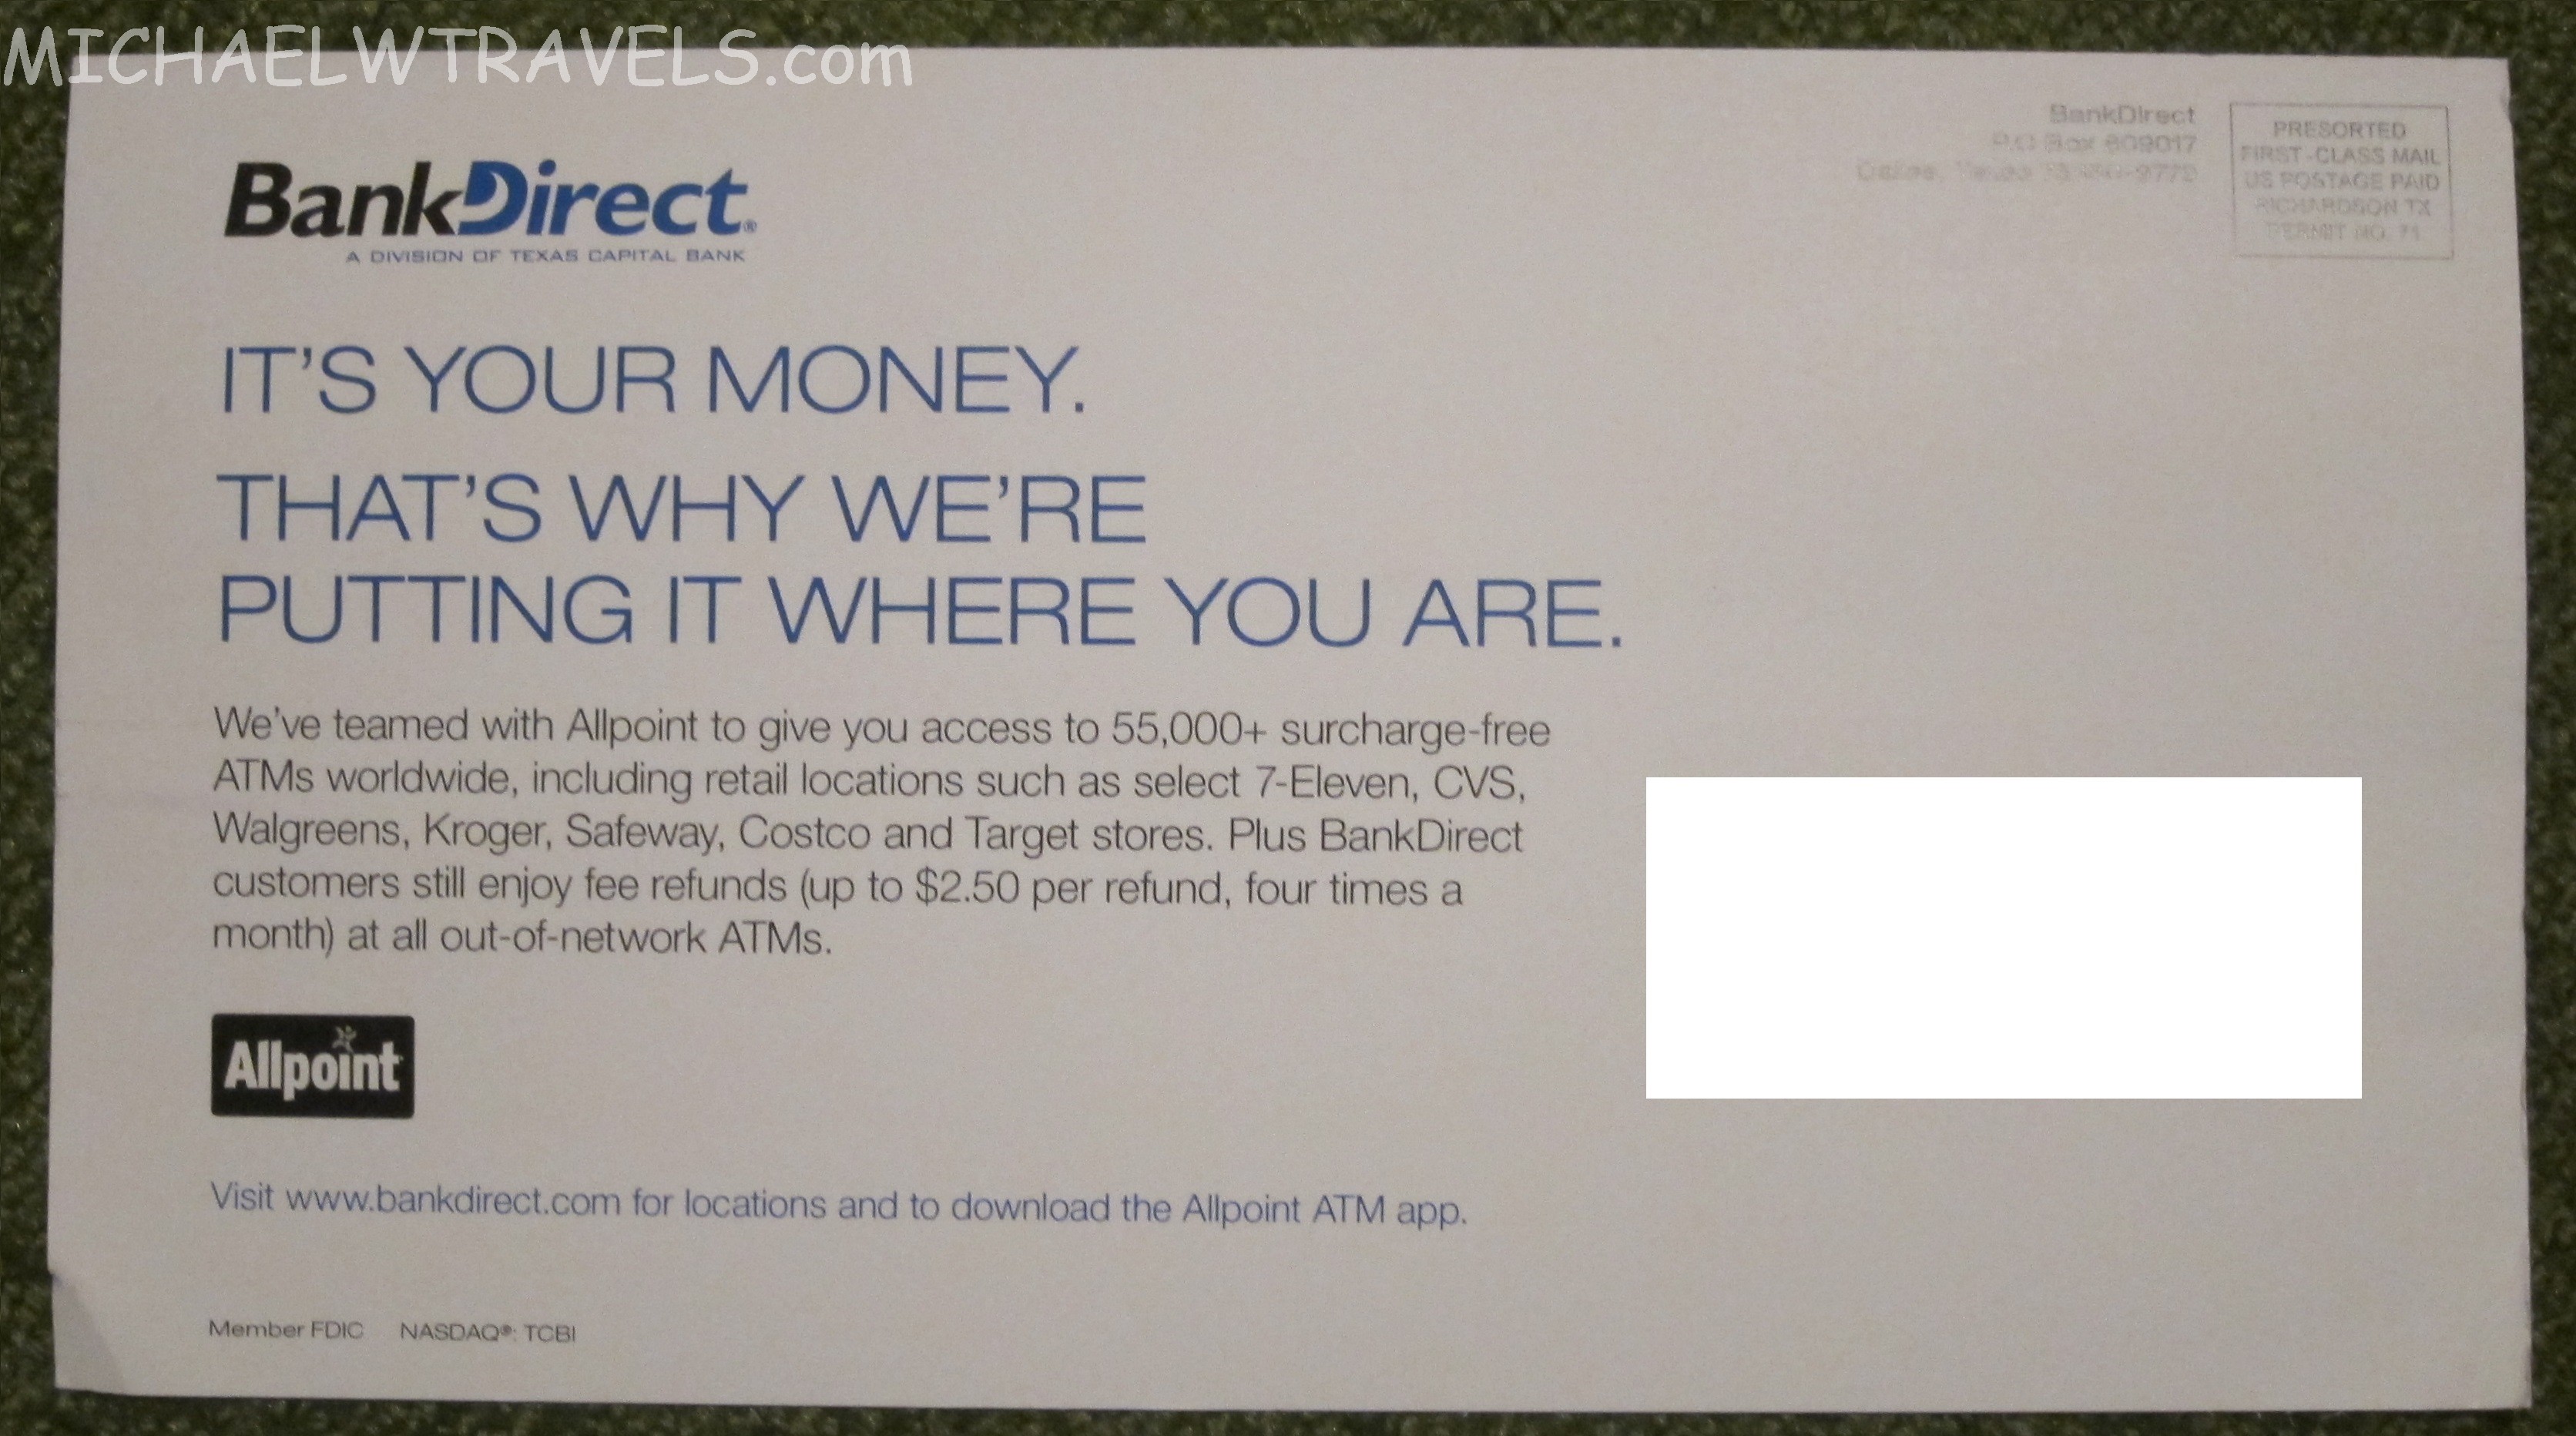 a white envelope with blue text